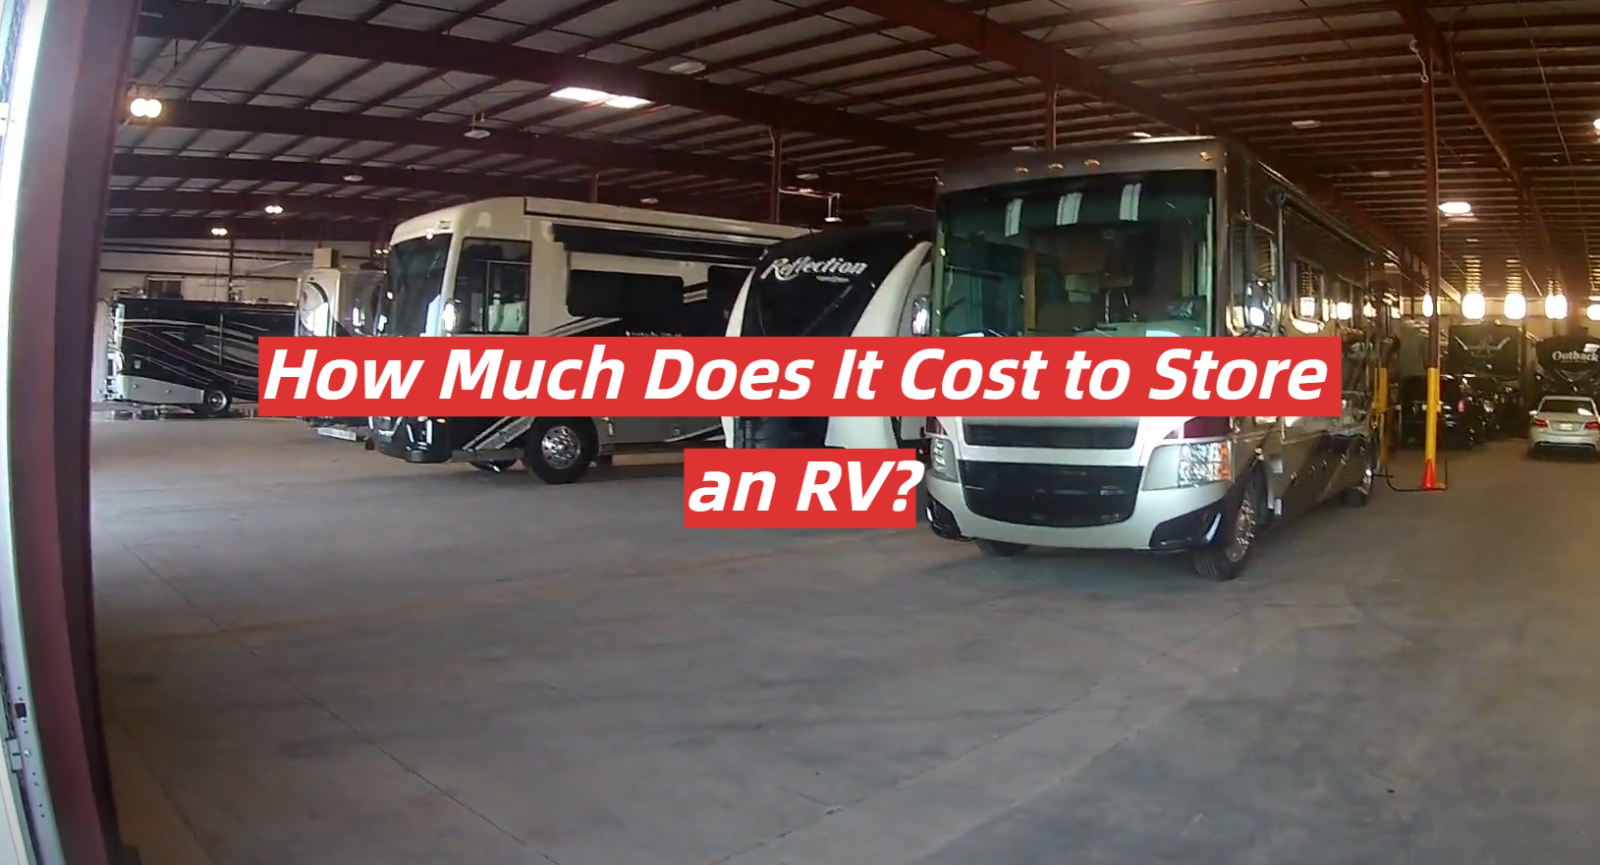 How Much Does It Cost to Store an RV?